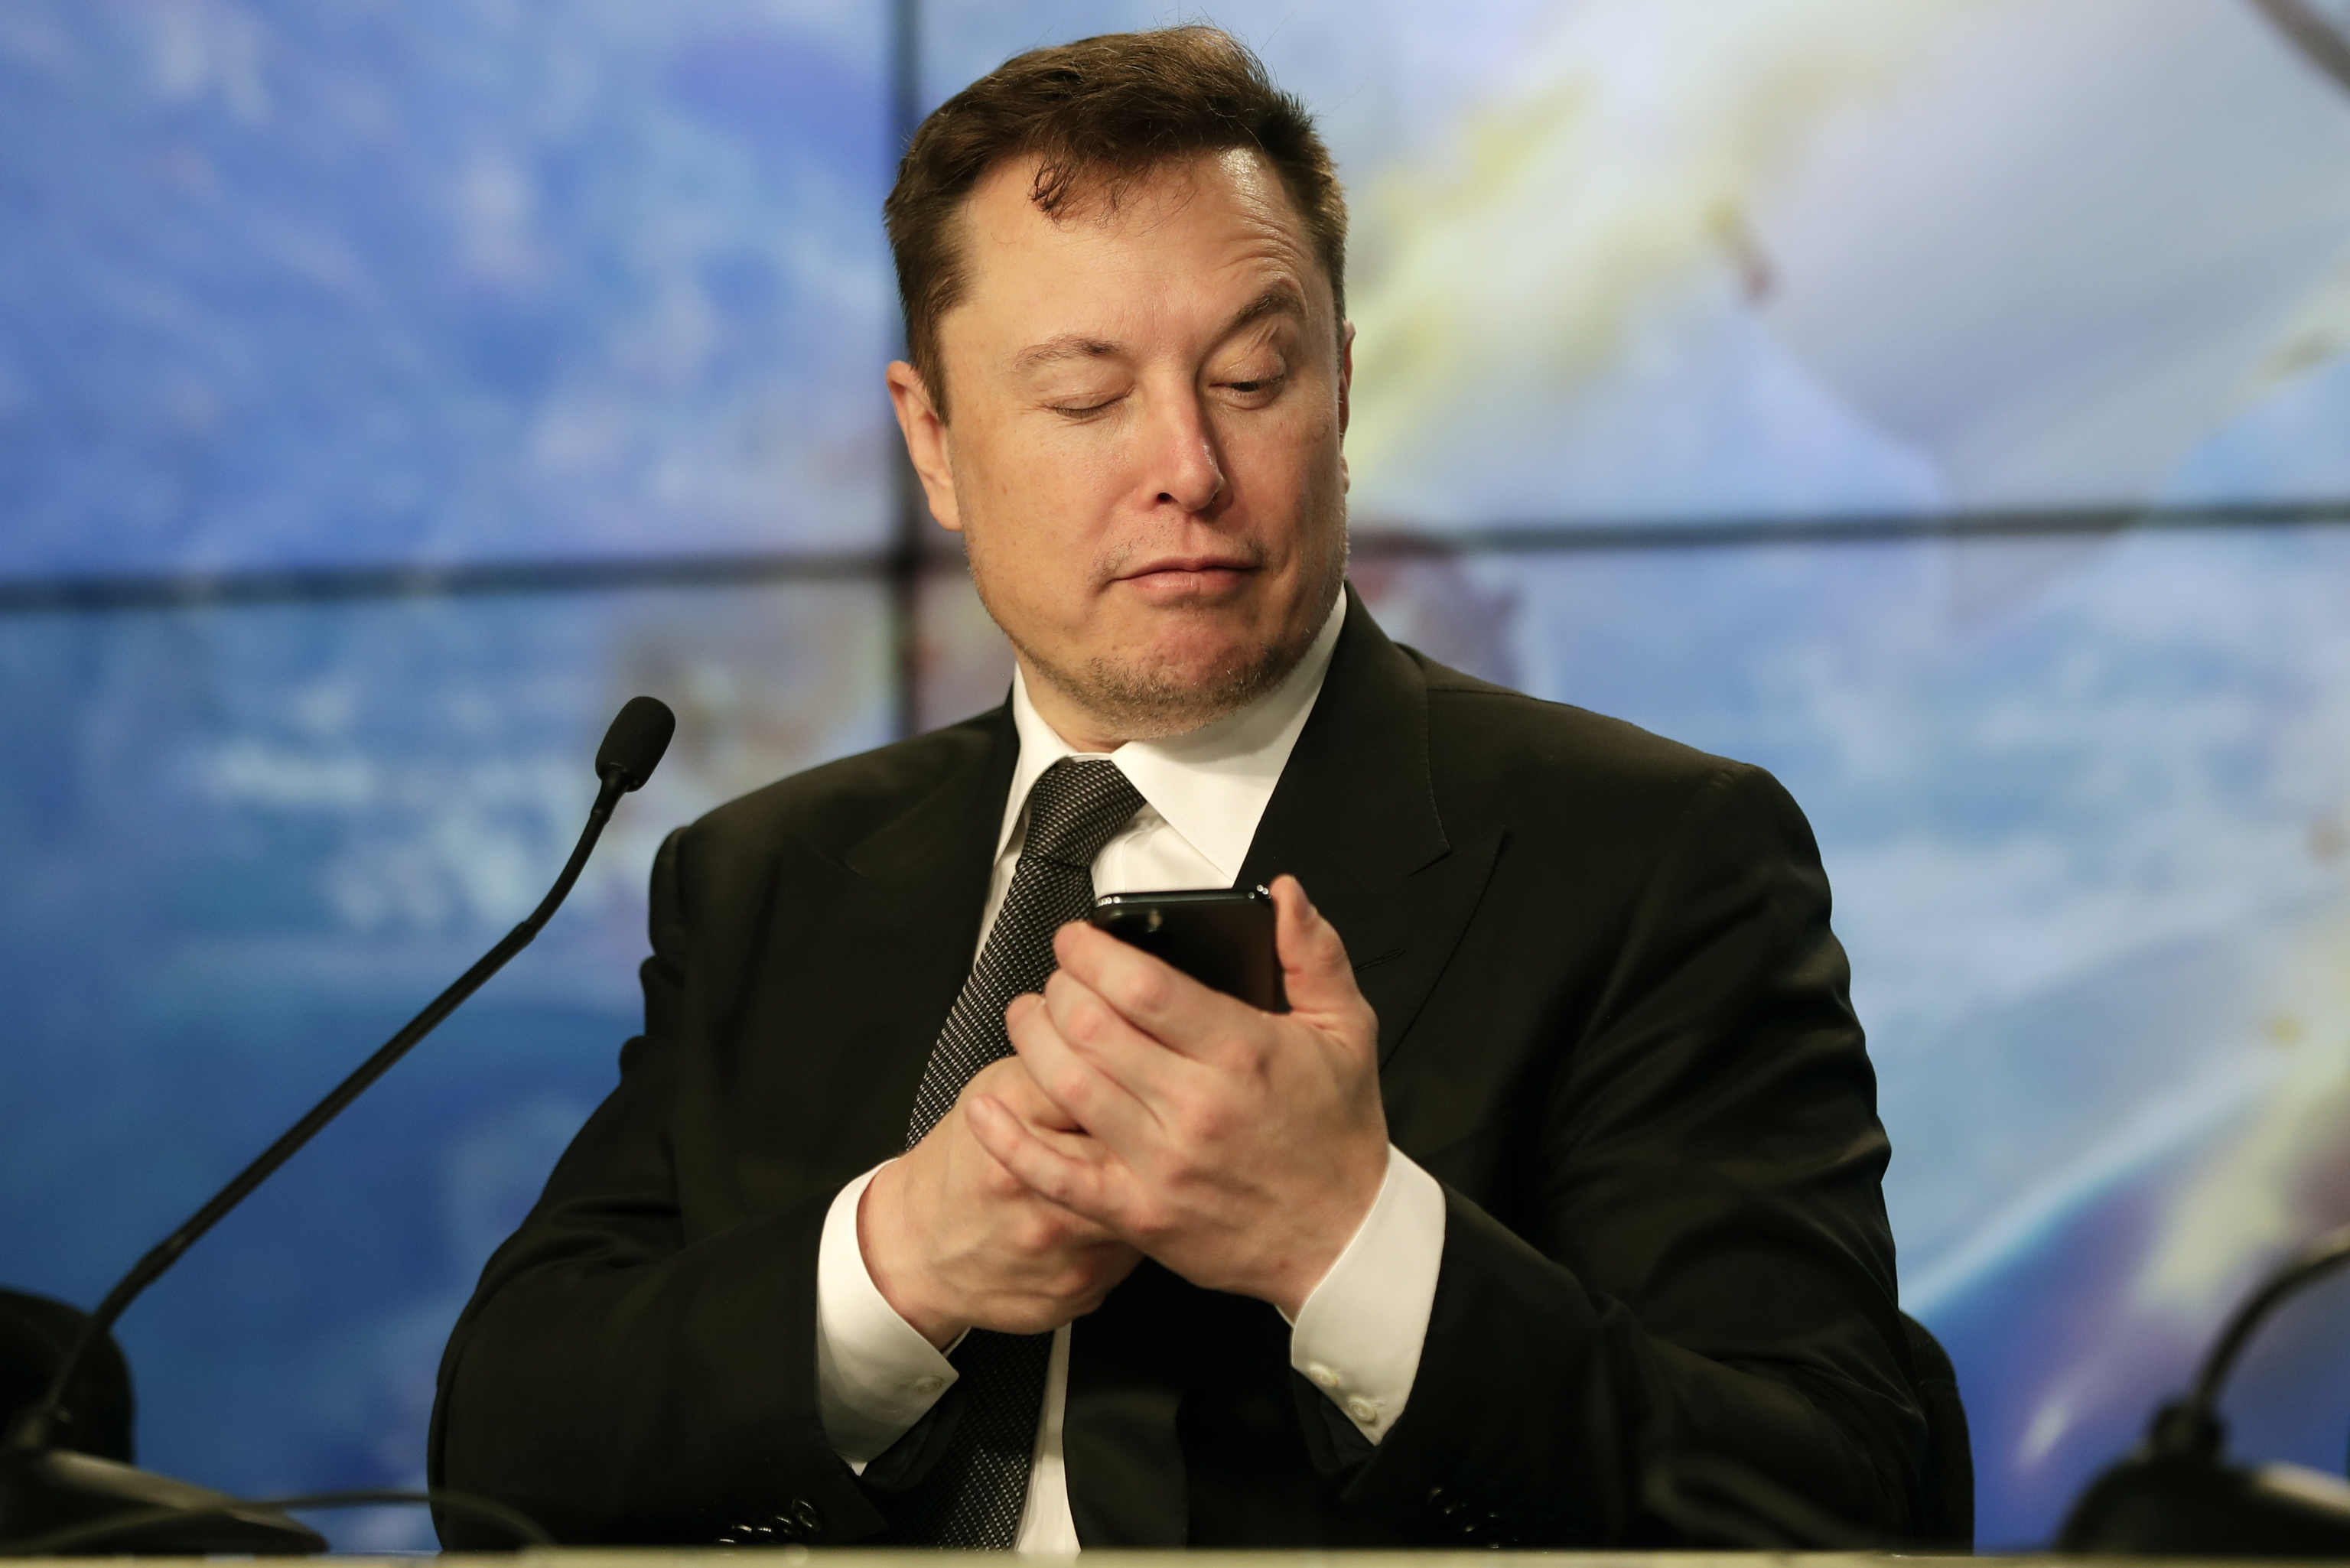 Elon Musk opened the door to layoffs on Twitter